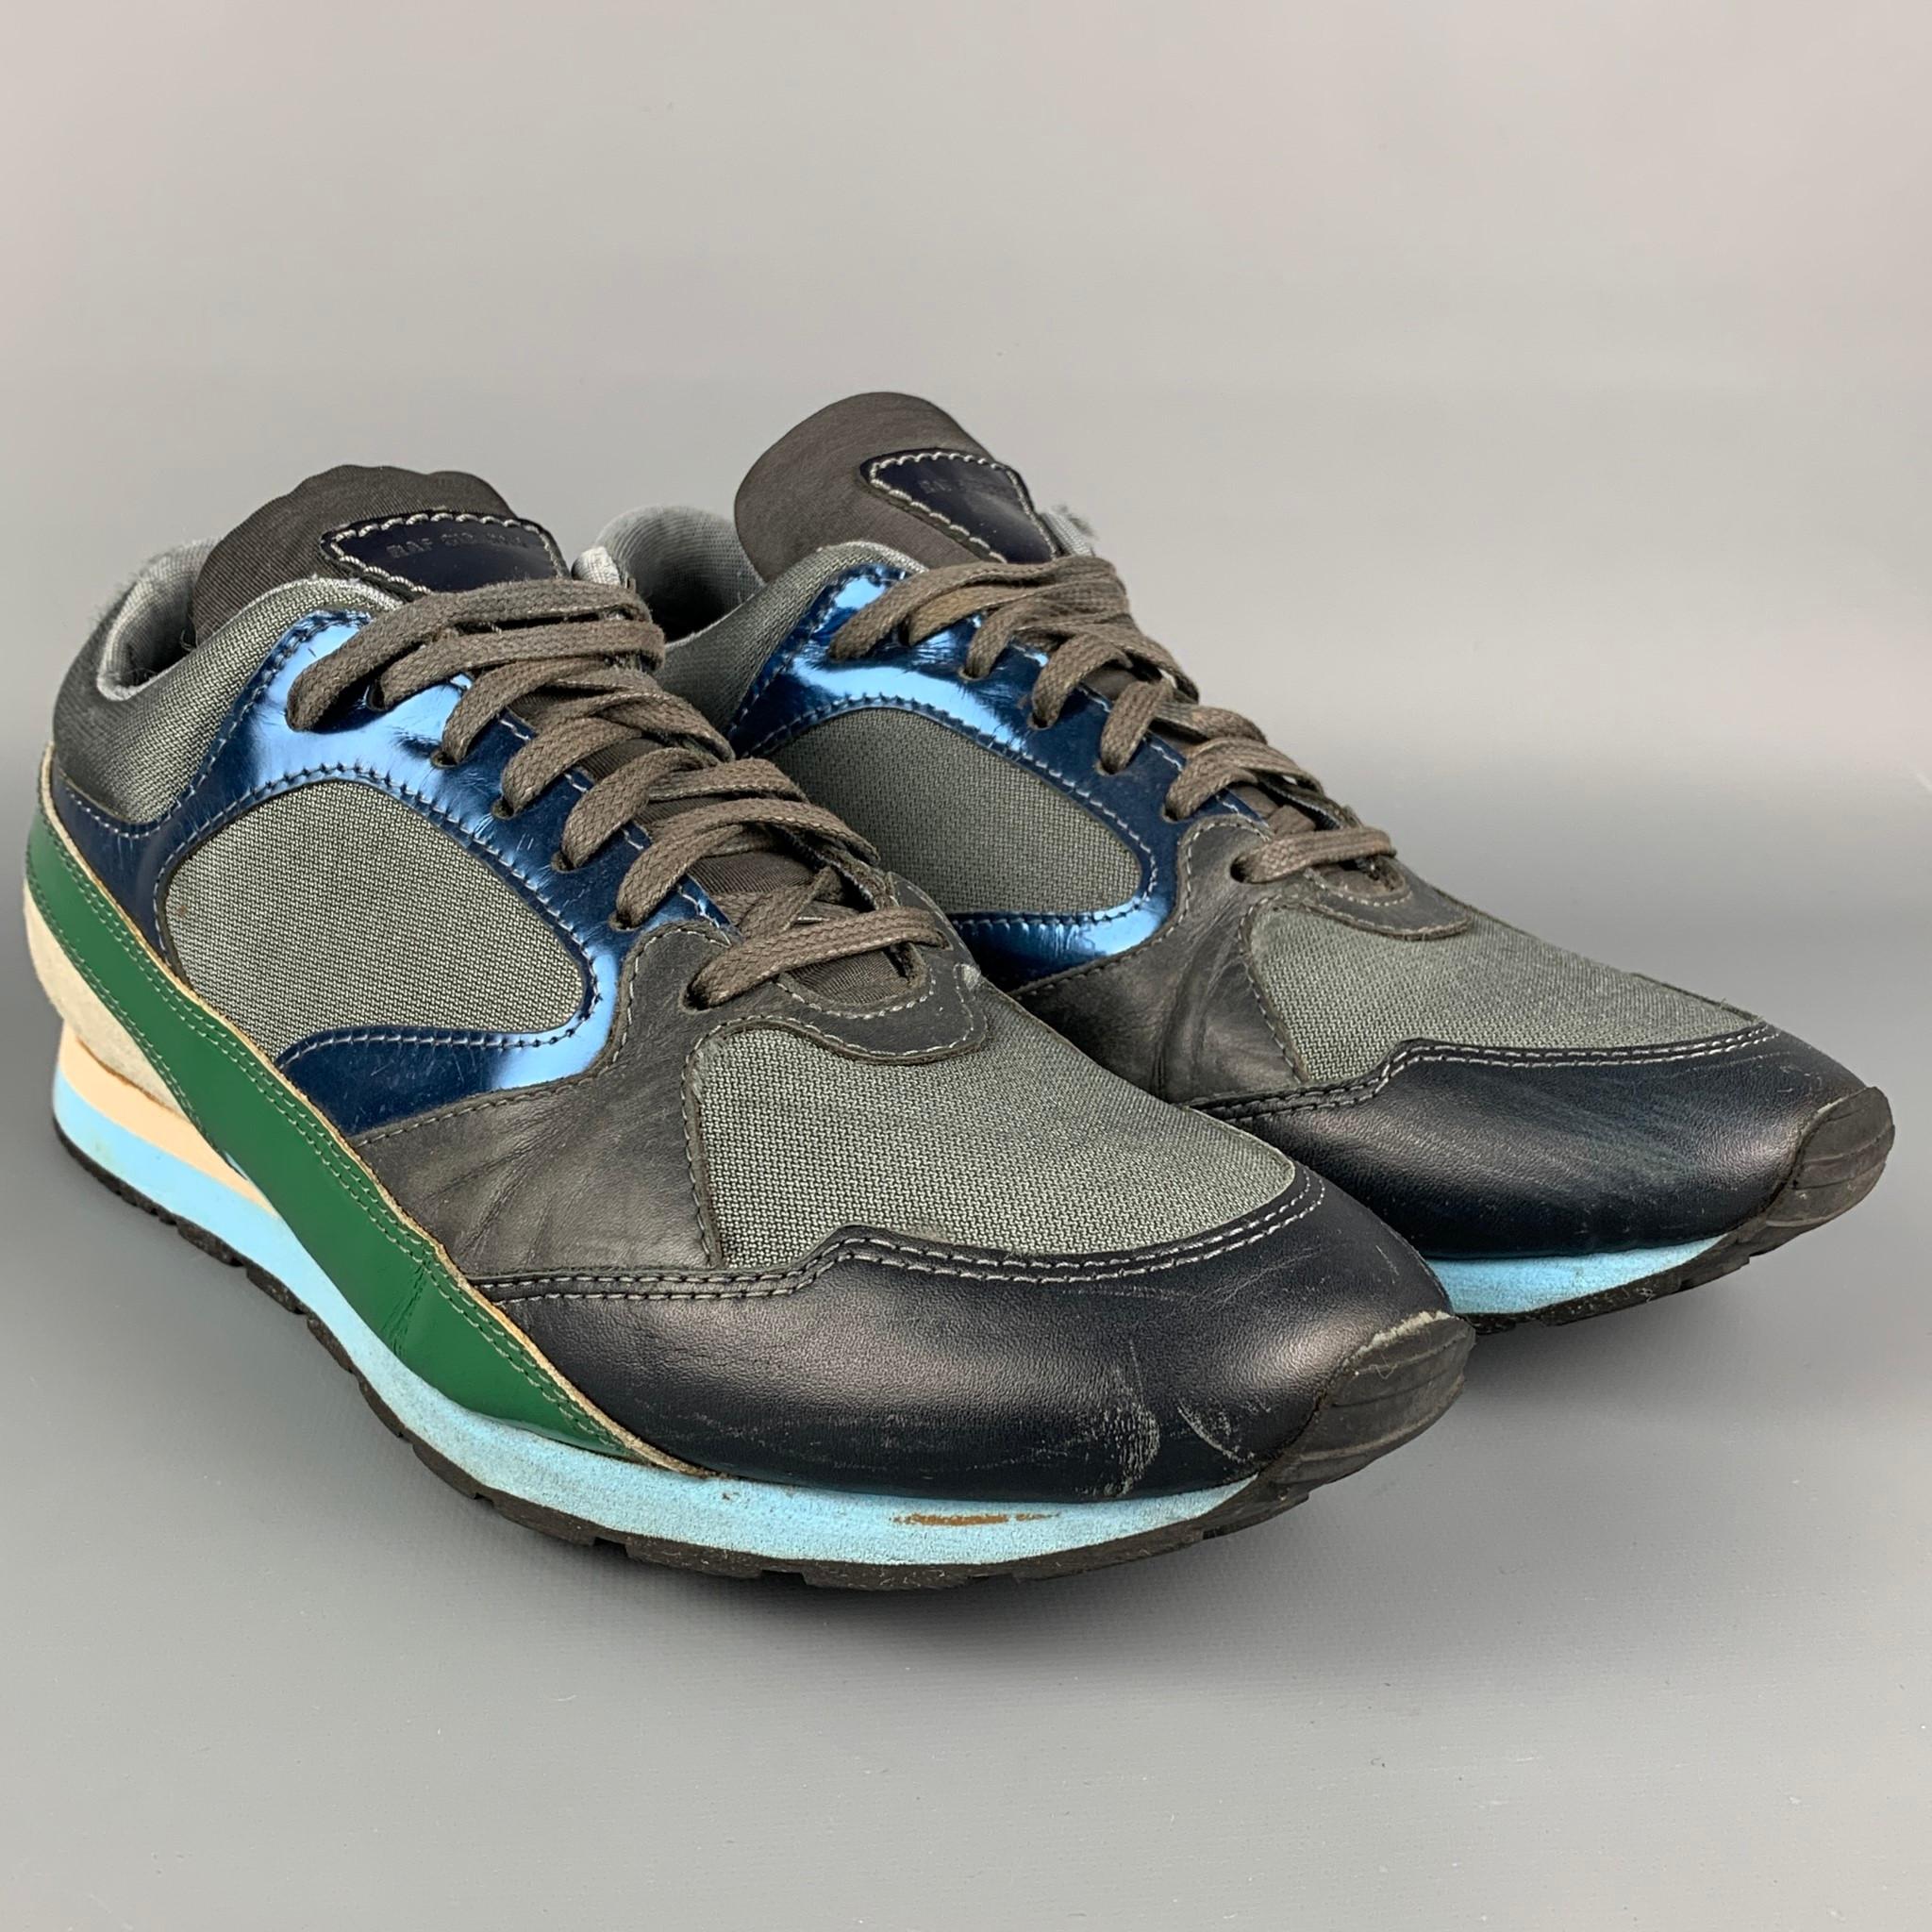 RAF SIMONS sneakers comes in a multi-color nylon featuring a color block style, leather trim, rubber sole, and a lace up closure. 

Good Pre-Owned Condition.
Marked: 13516 44

Outsole: 12.25 in. x 4 in. 